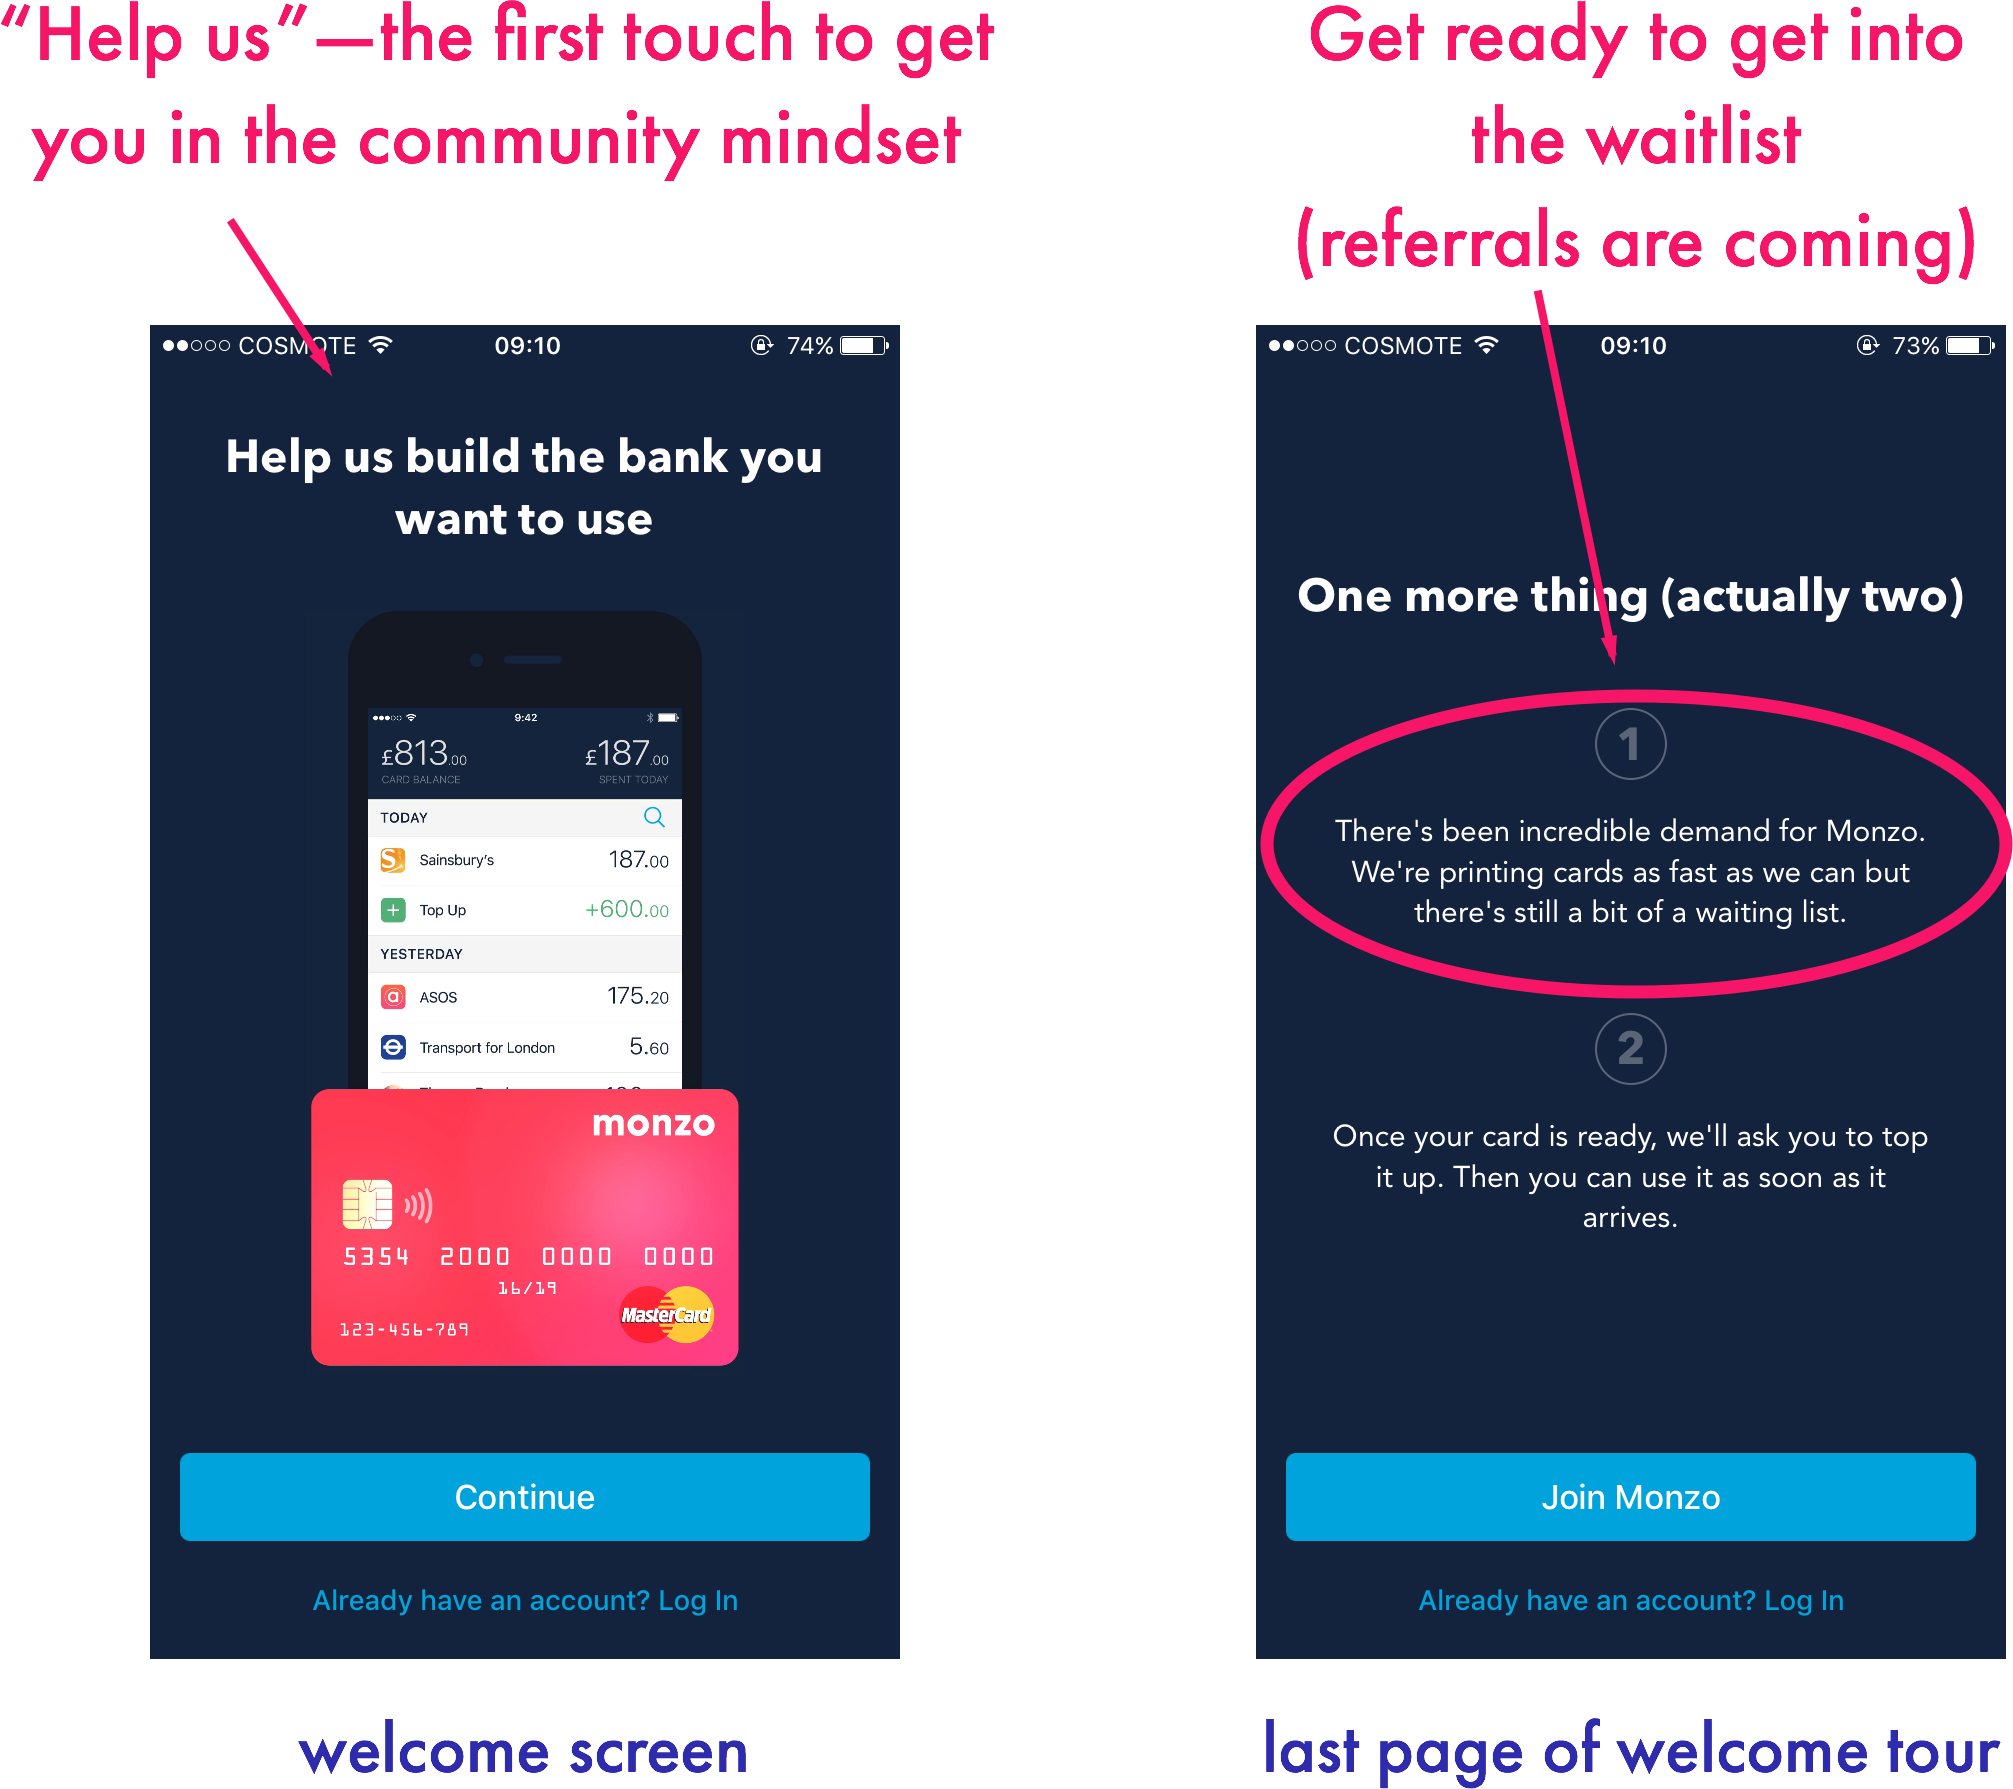 What are some examples of great UX for “Invite Friends”?